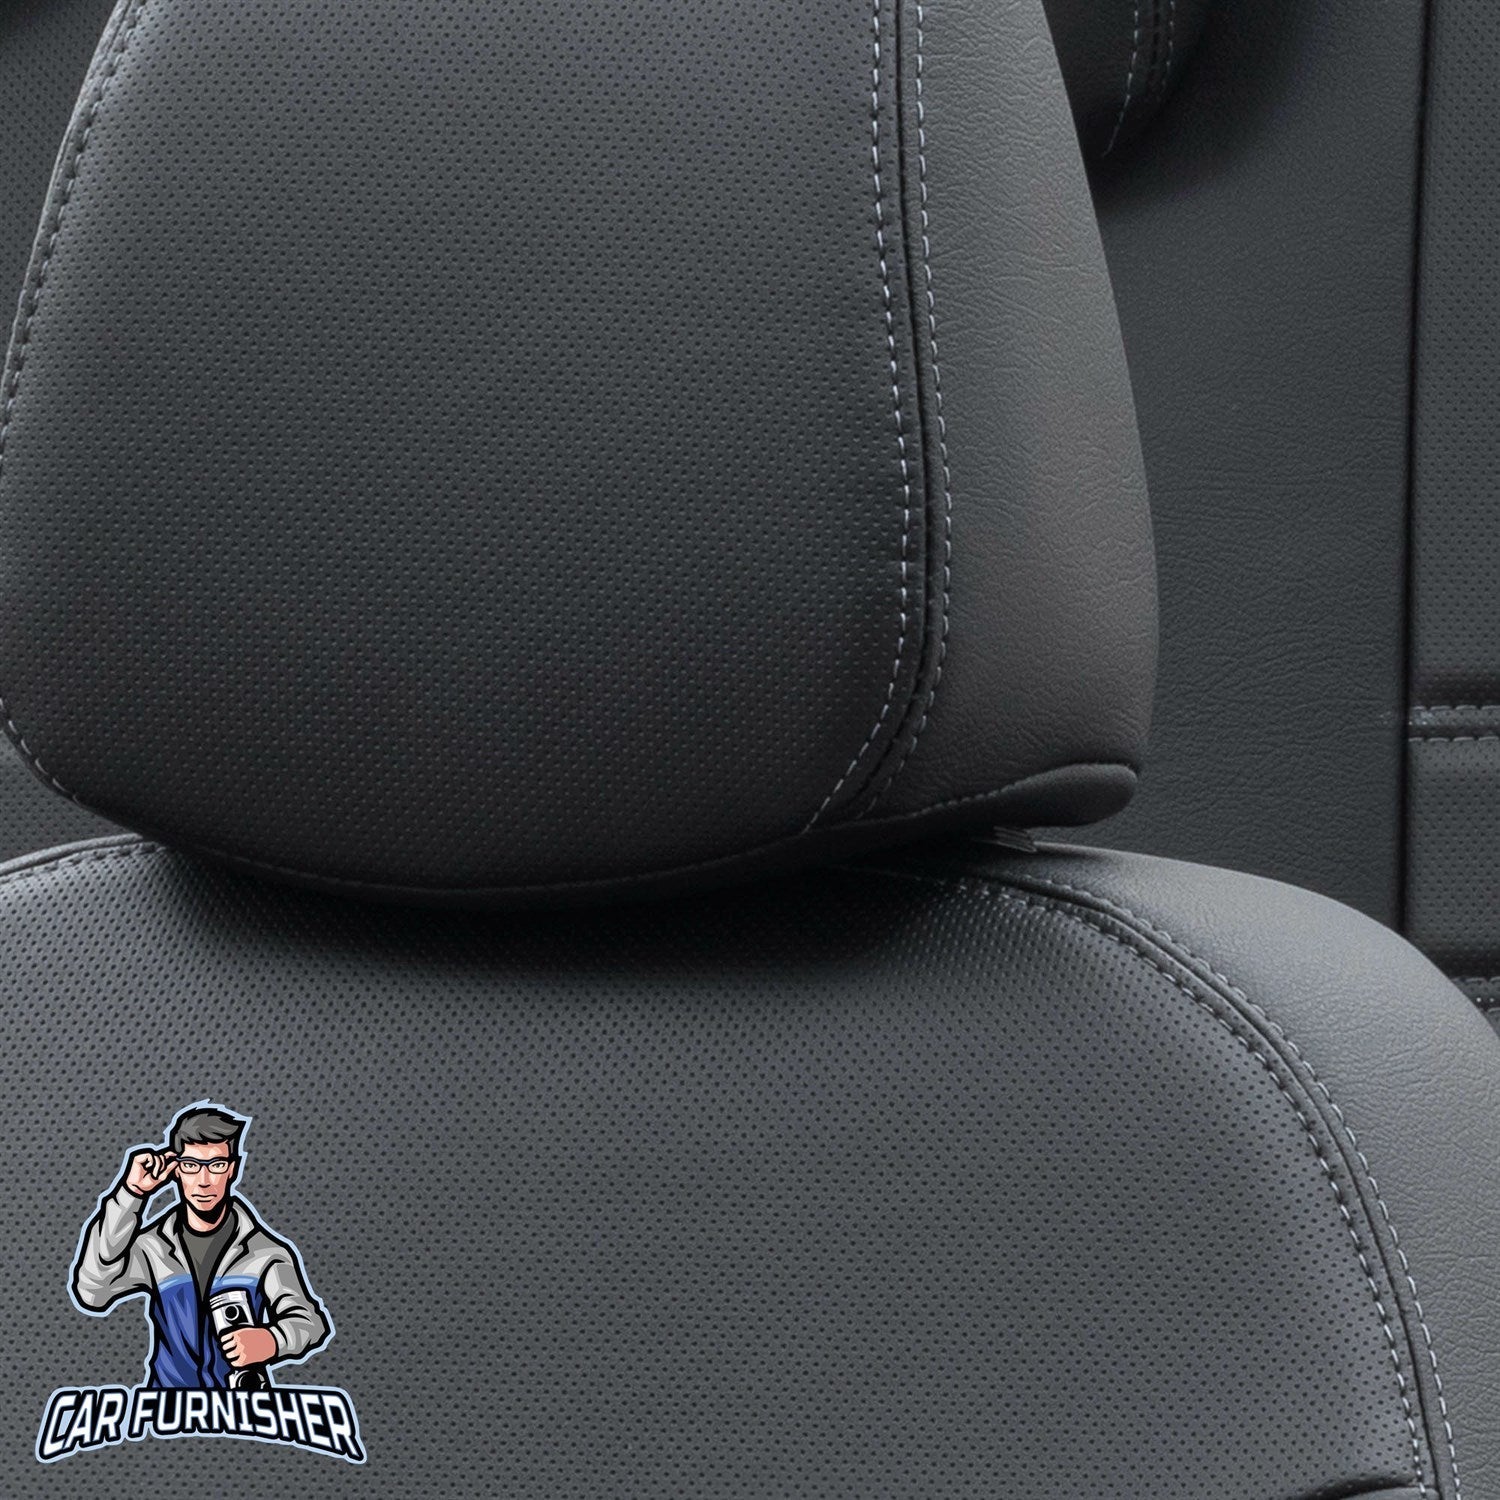 Opel Frontera Seat Cover Istanbul Leather Design Black Leather